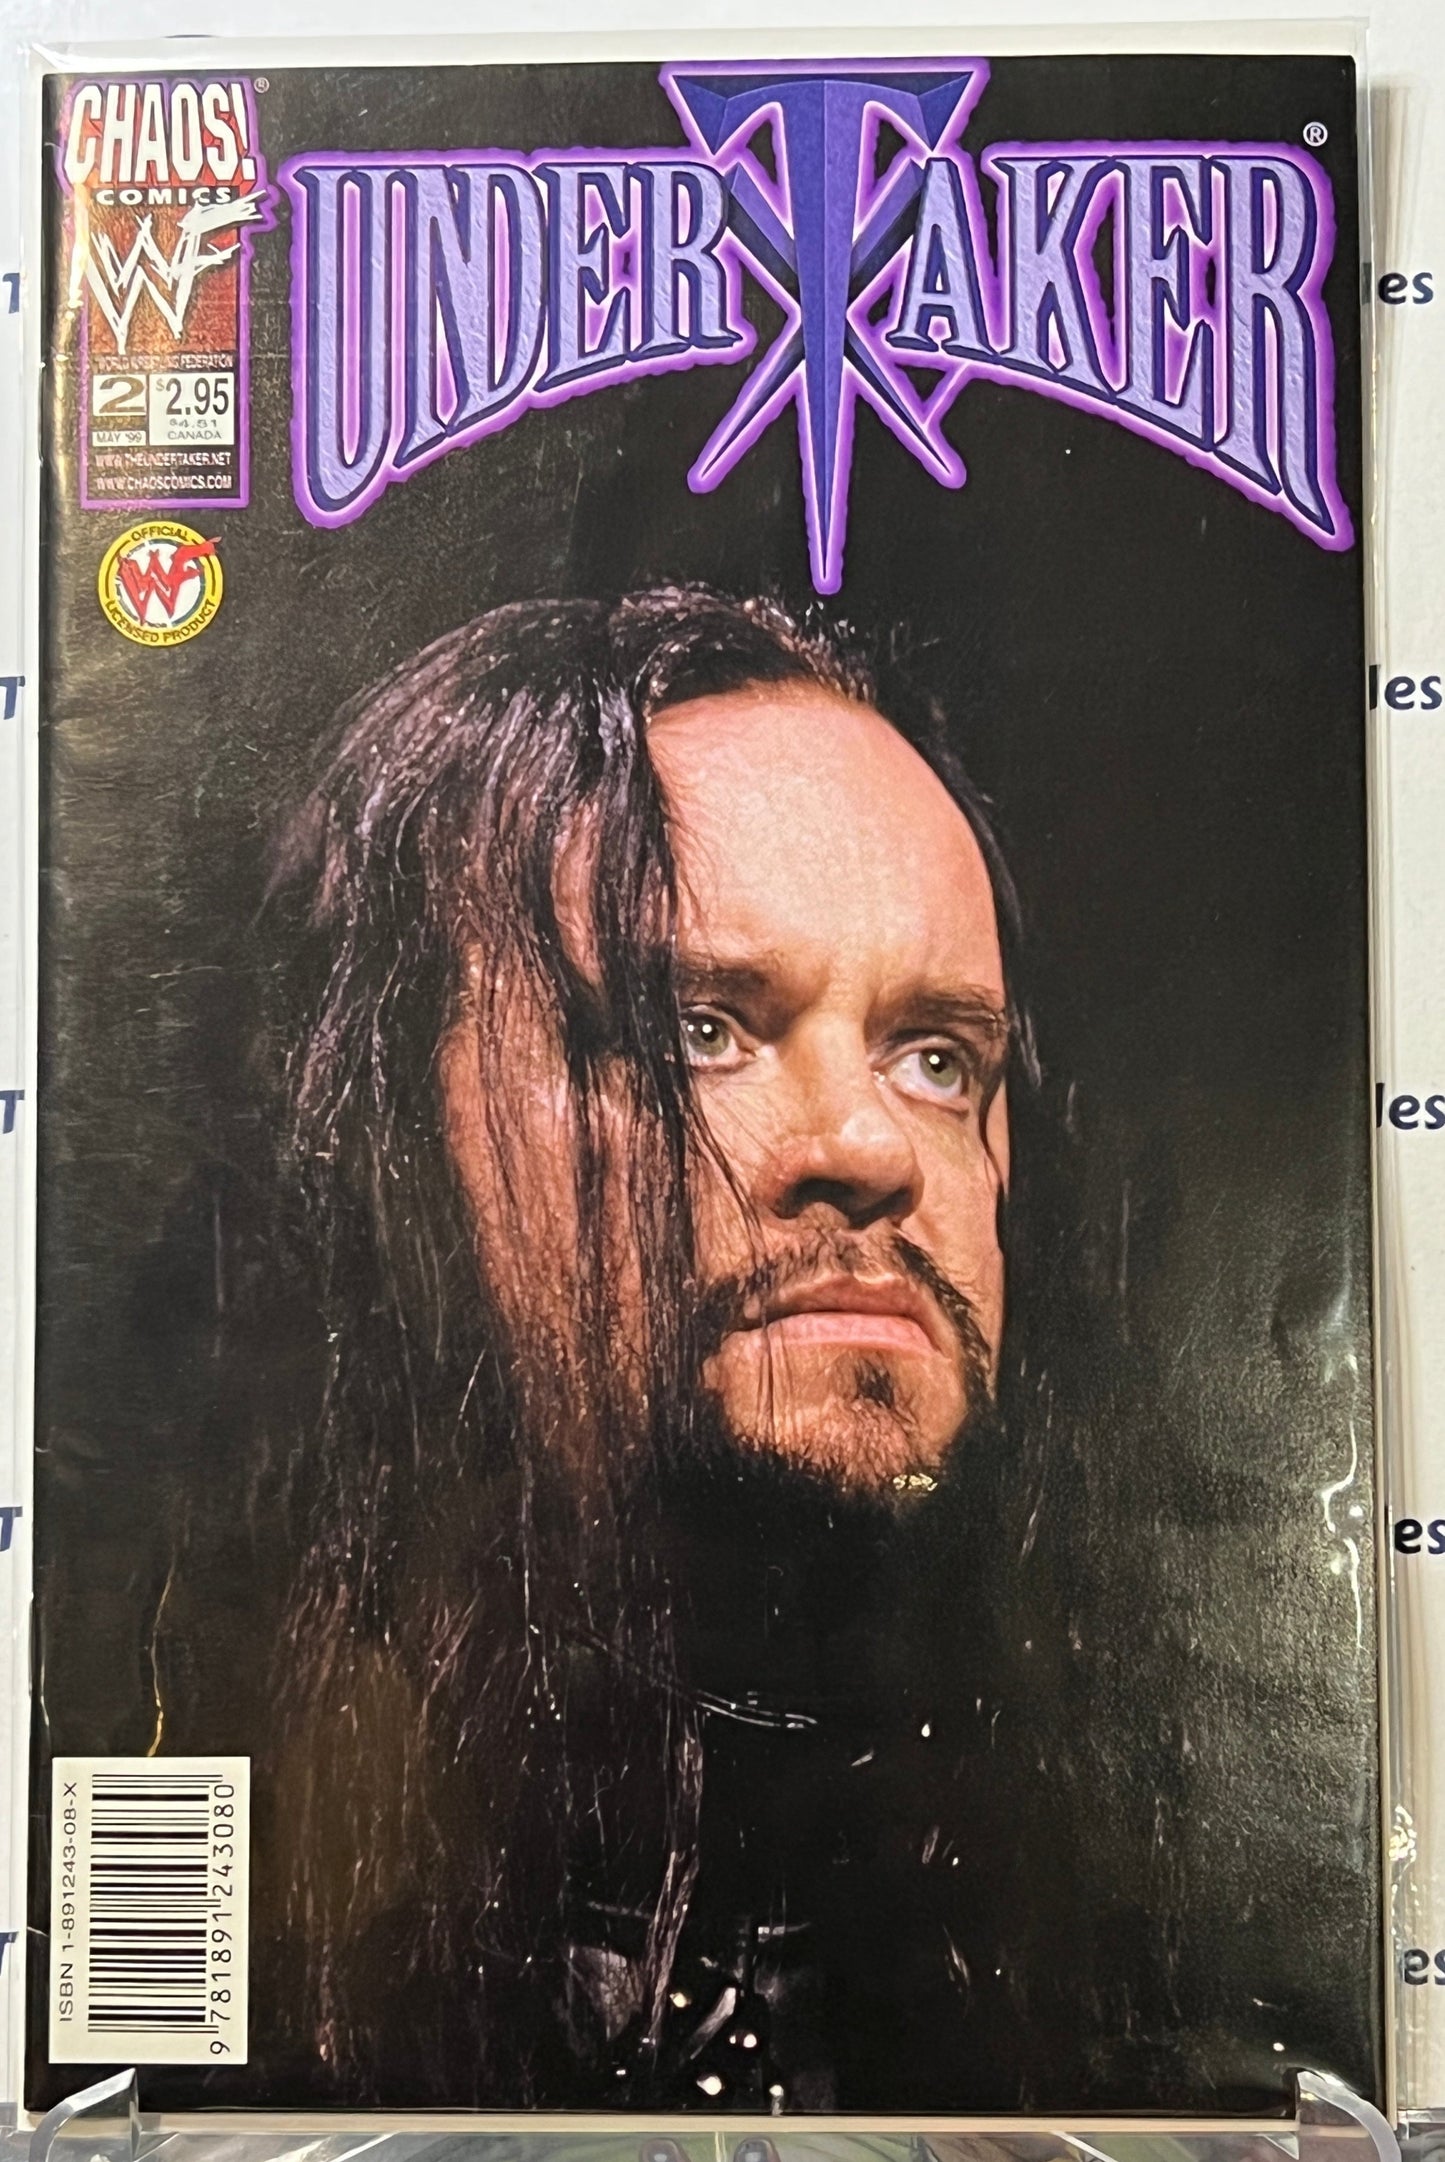 UNDER TAKER # 2 WWF / CHAOS COMICS PHOTO VARIANT COVER COMIC BOOK 1999